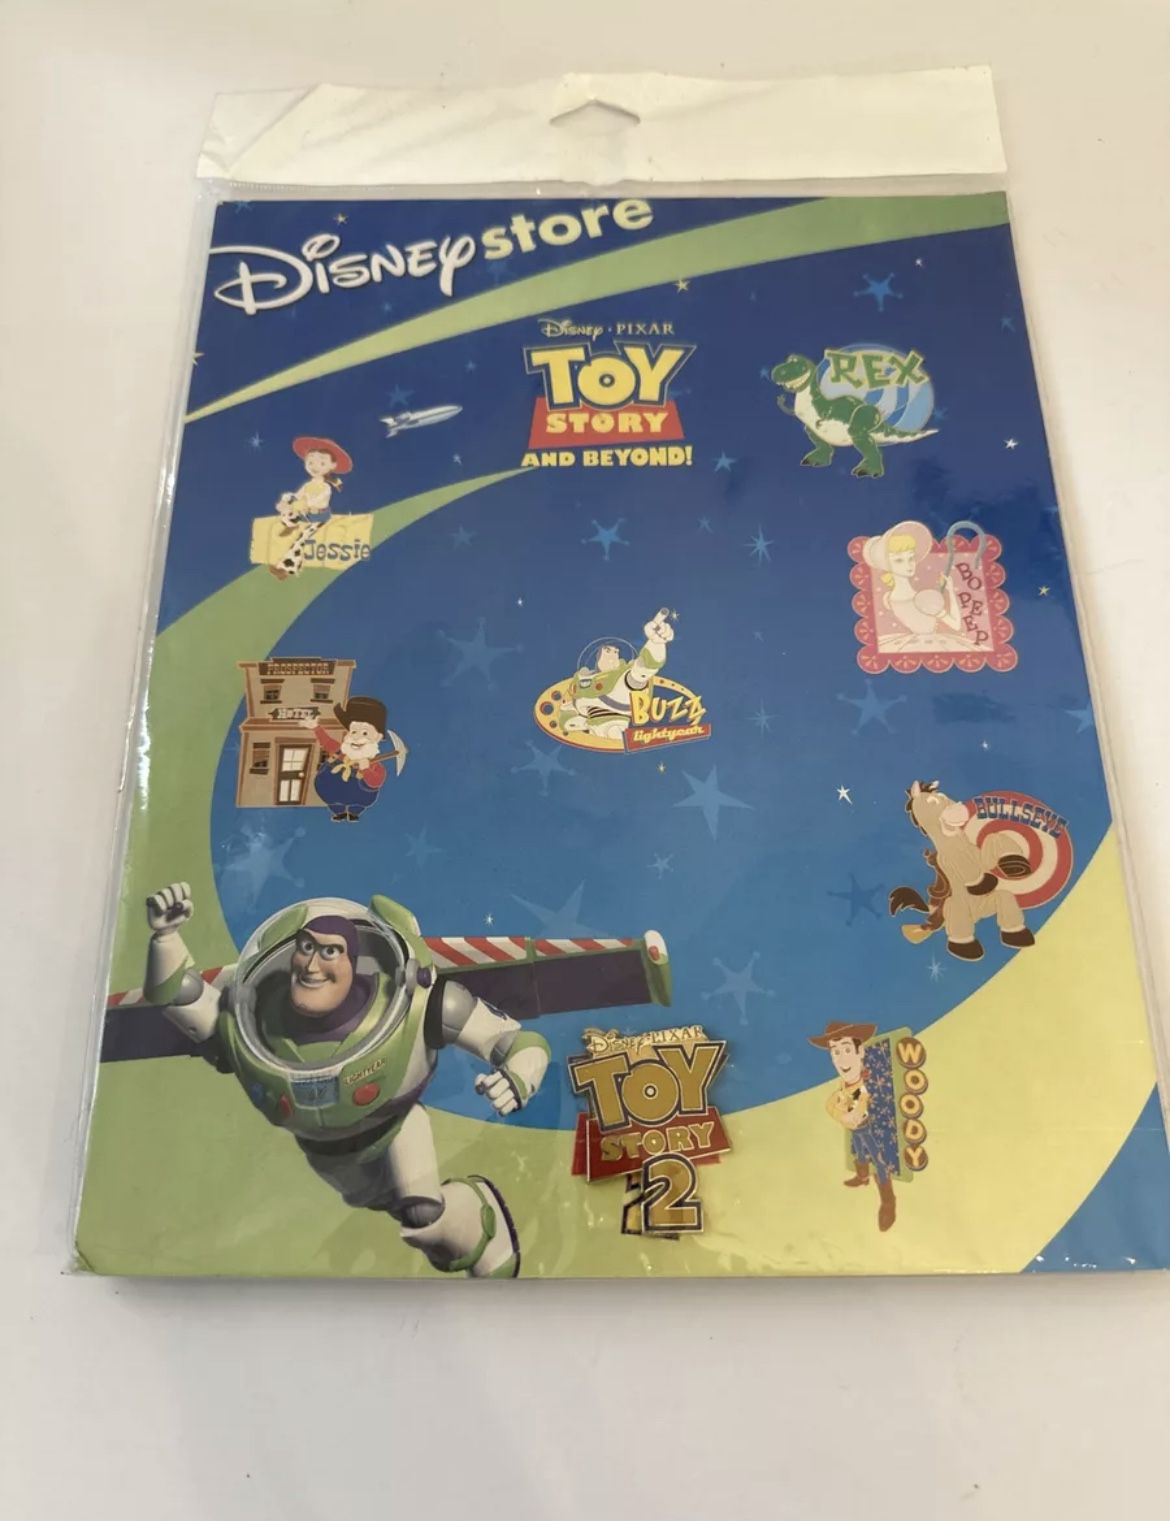 RARE Disney Store Pixar “TOY STORY AND BEYOND!” Board SEALED